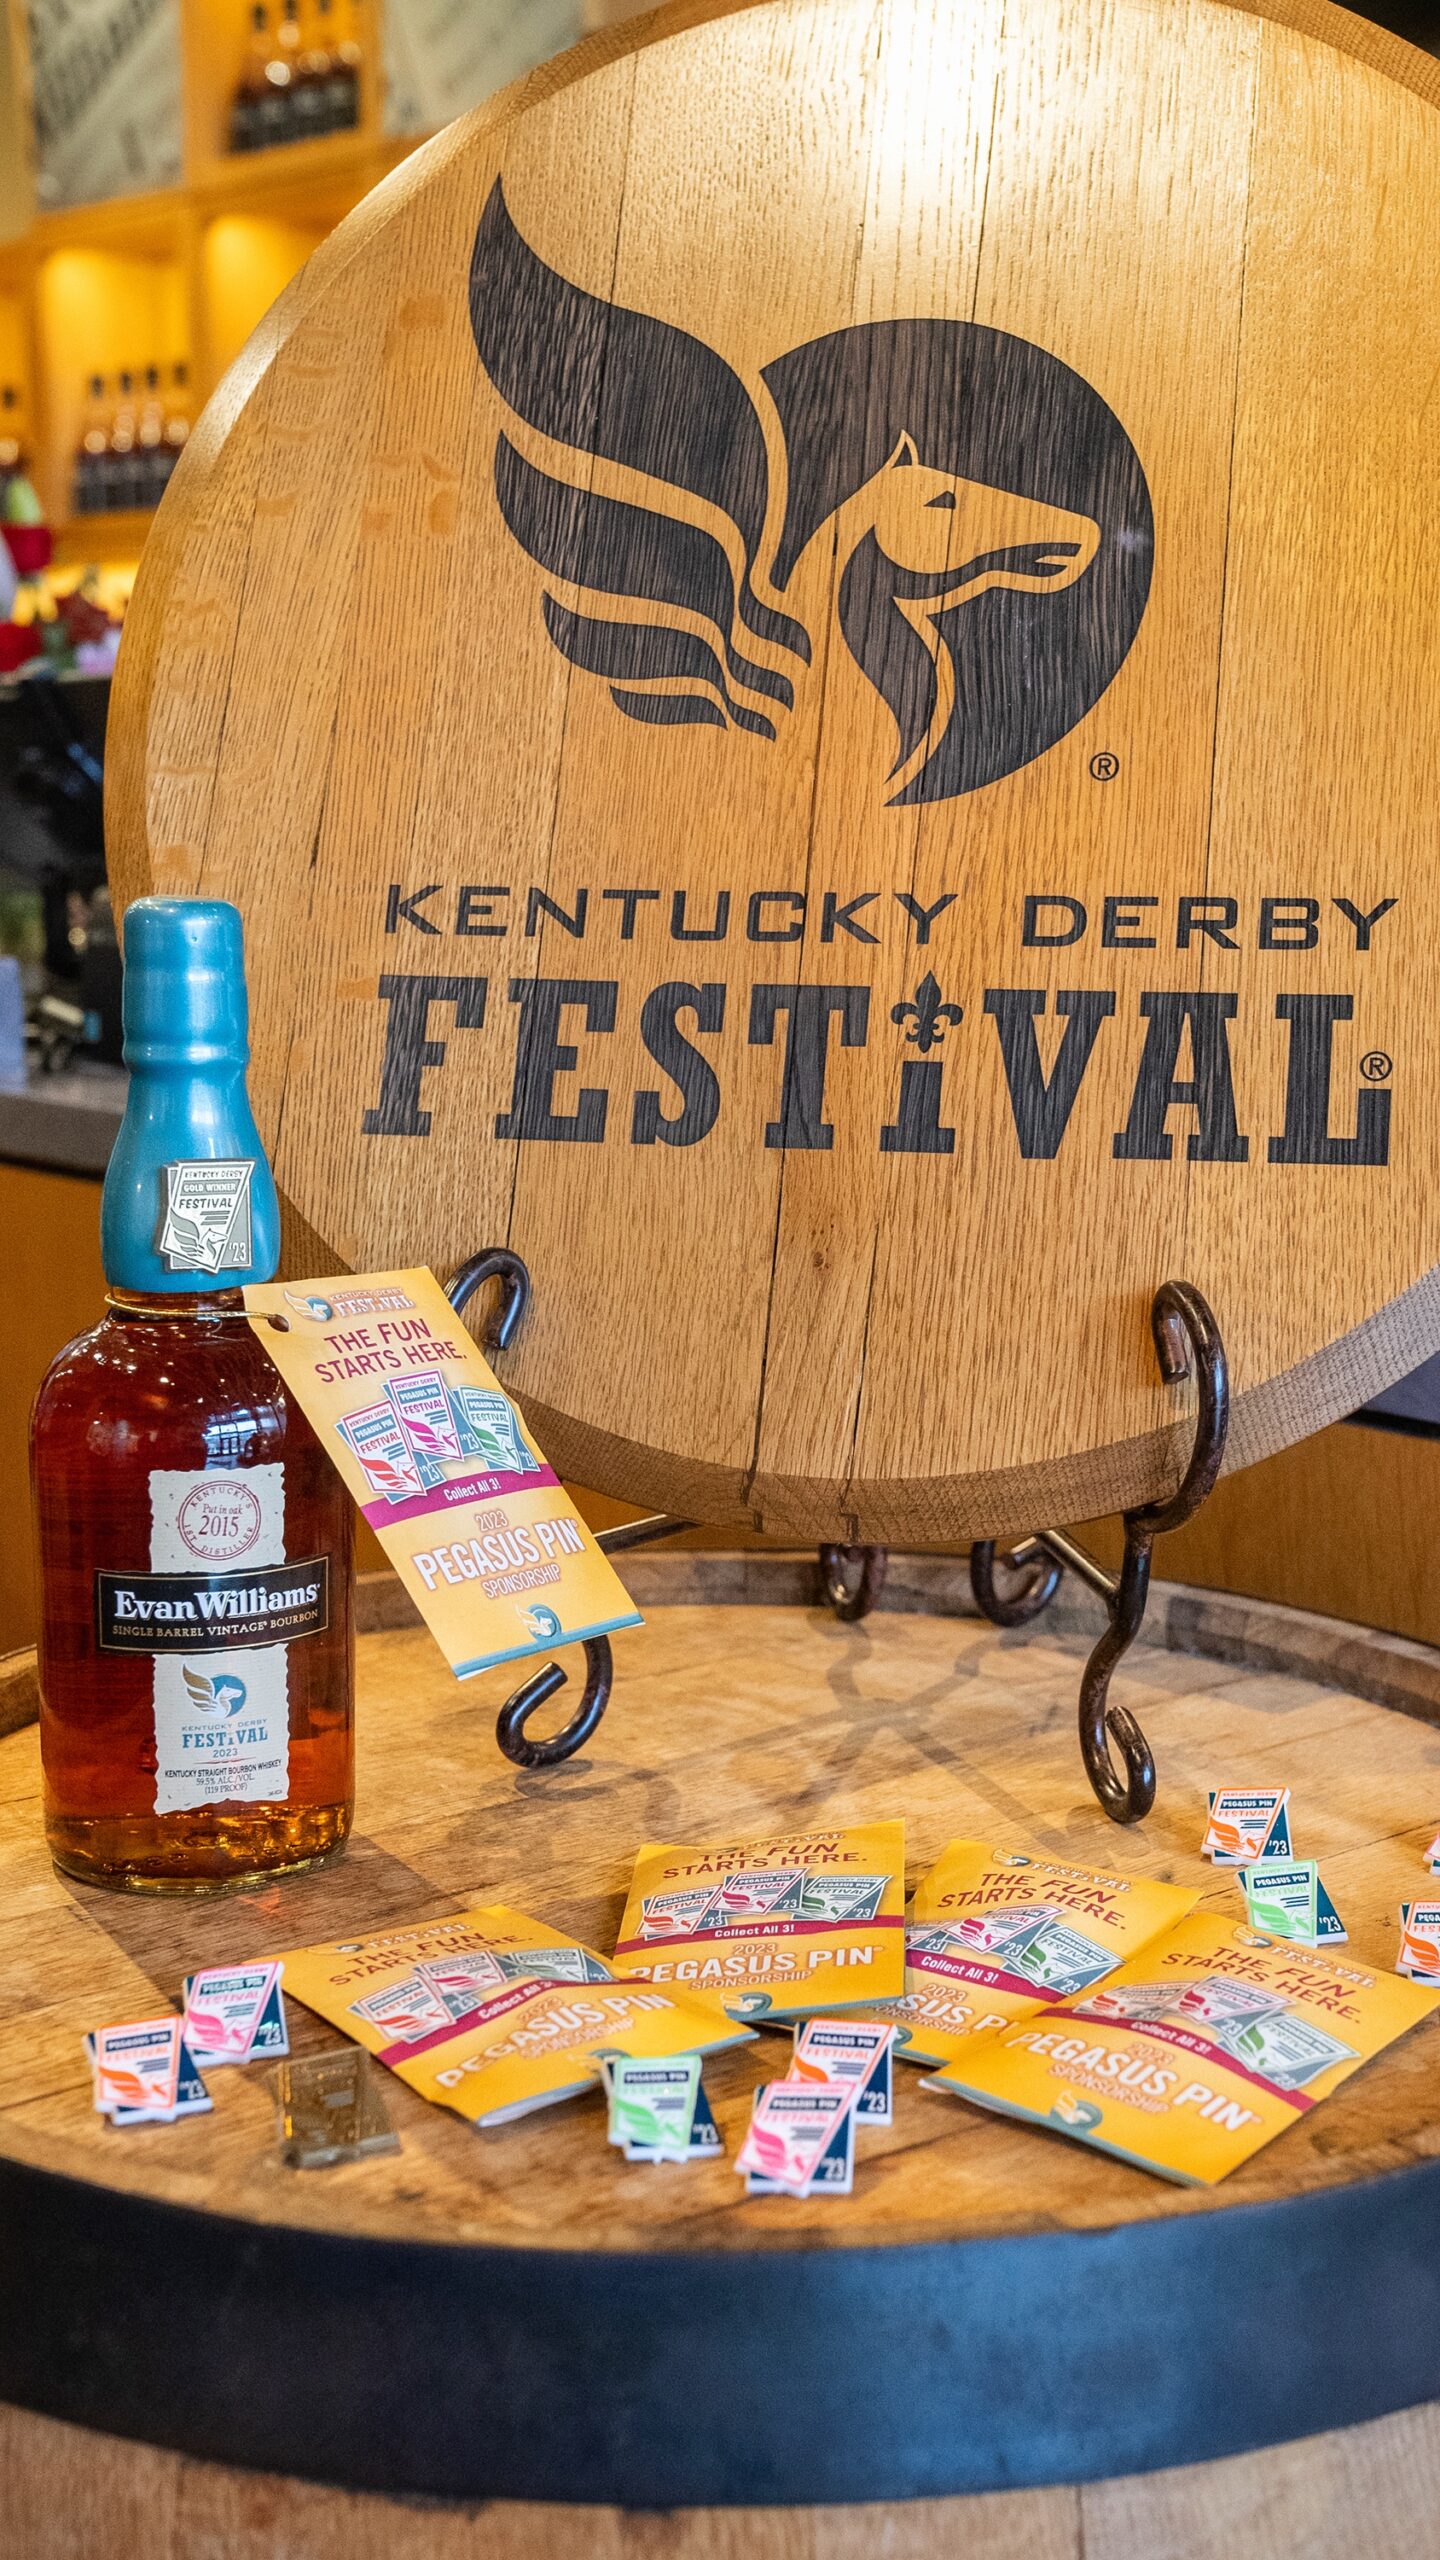 Evan Williams Releases Annual, Limited Edition Kentucky Derby Festival